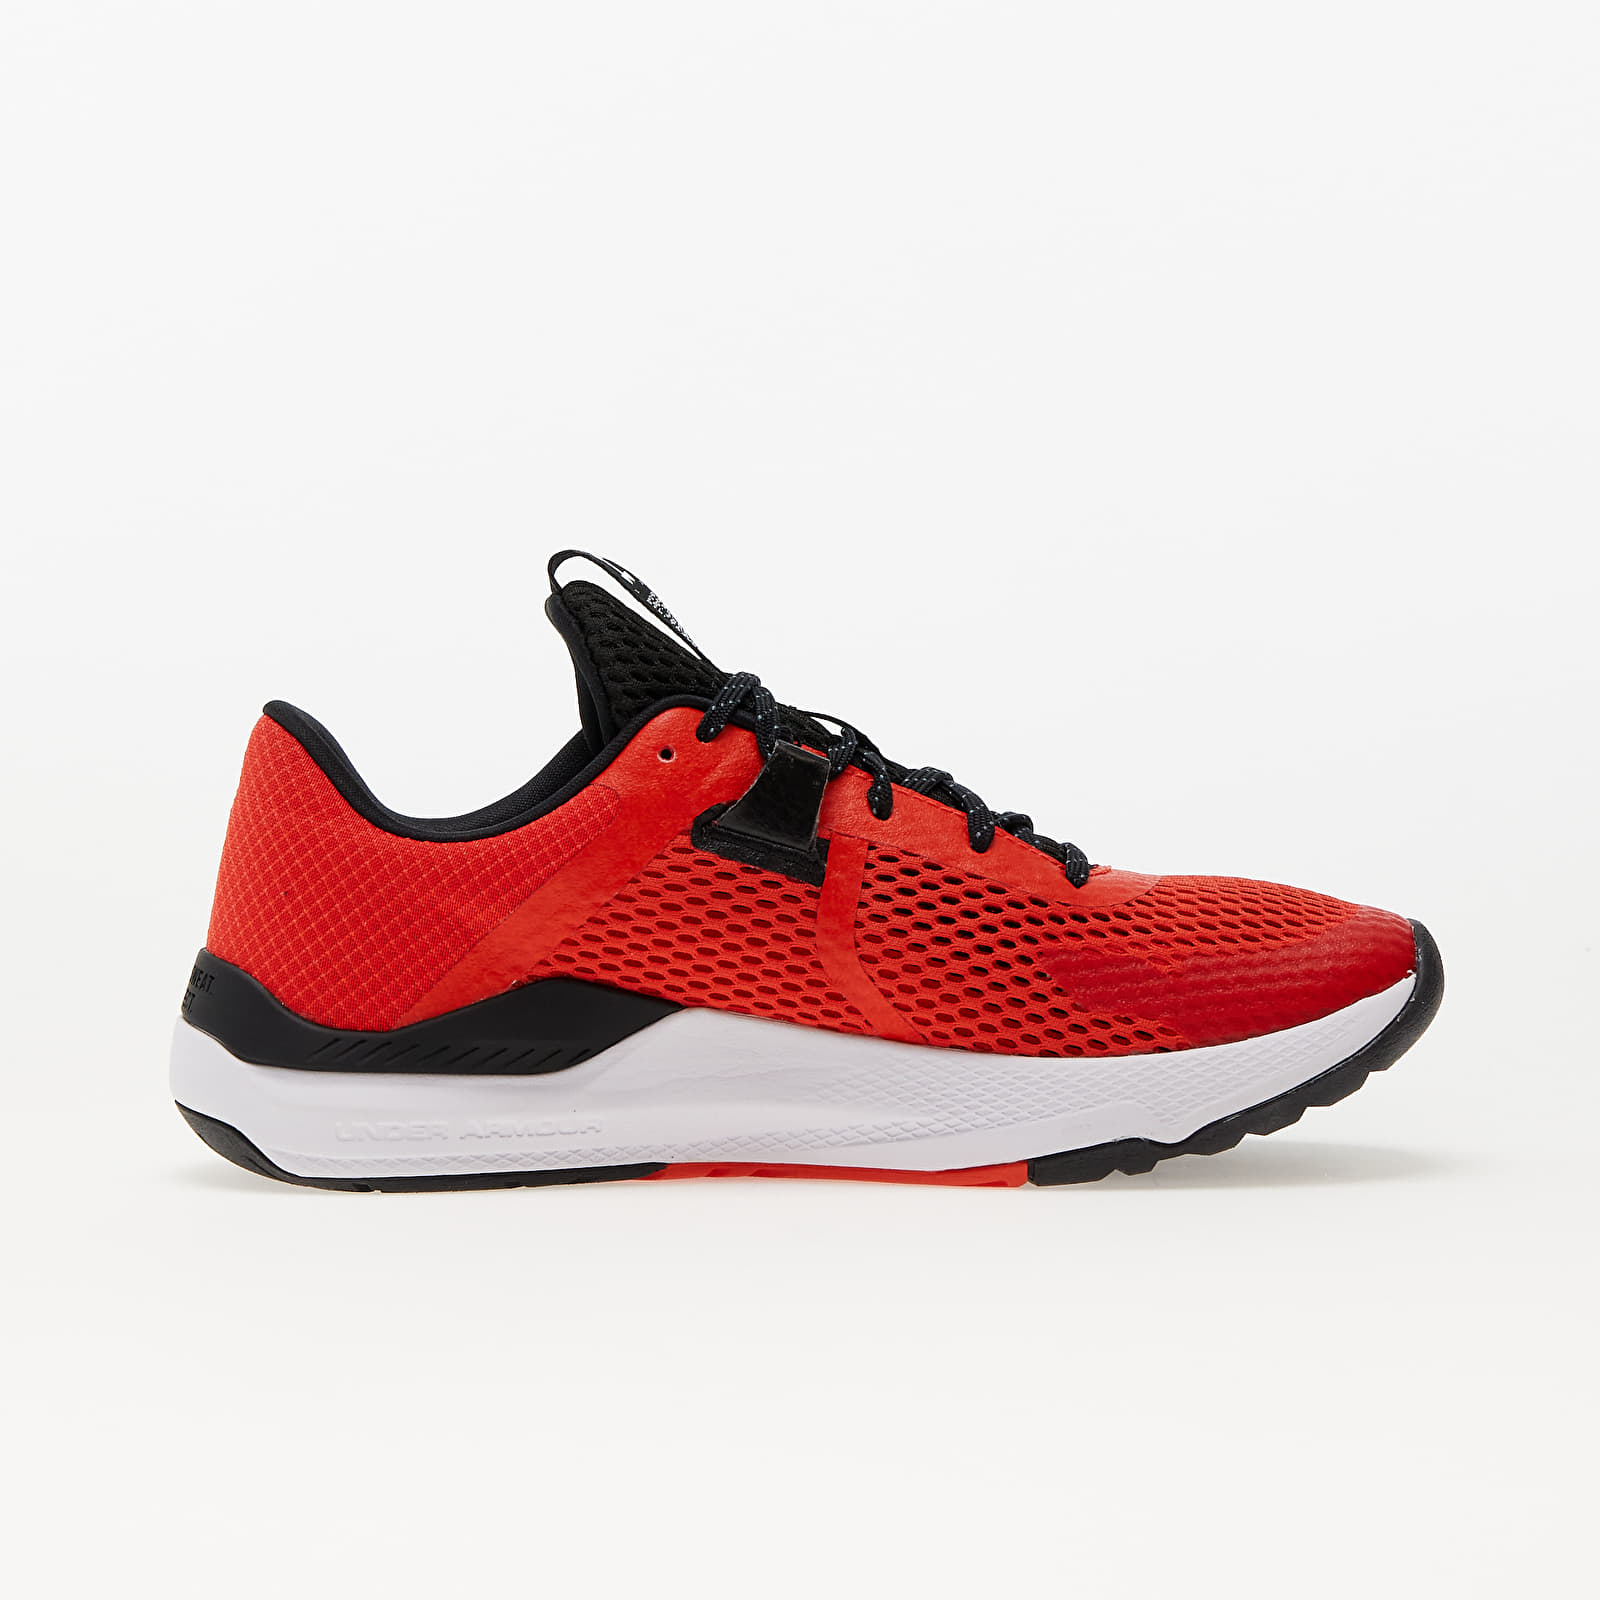 Sapatilhas de fitness Under Armour UA Project Rock BSR 2-RED 